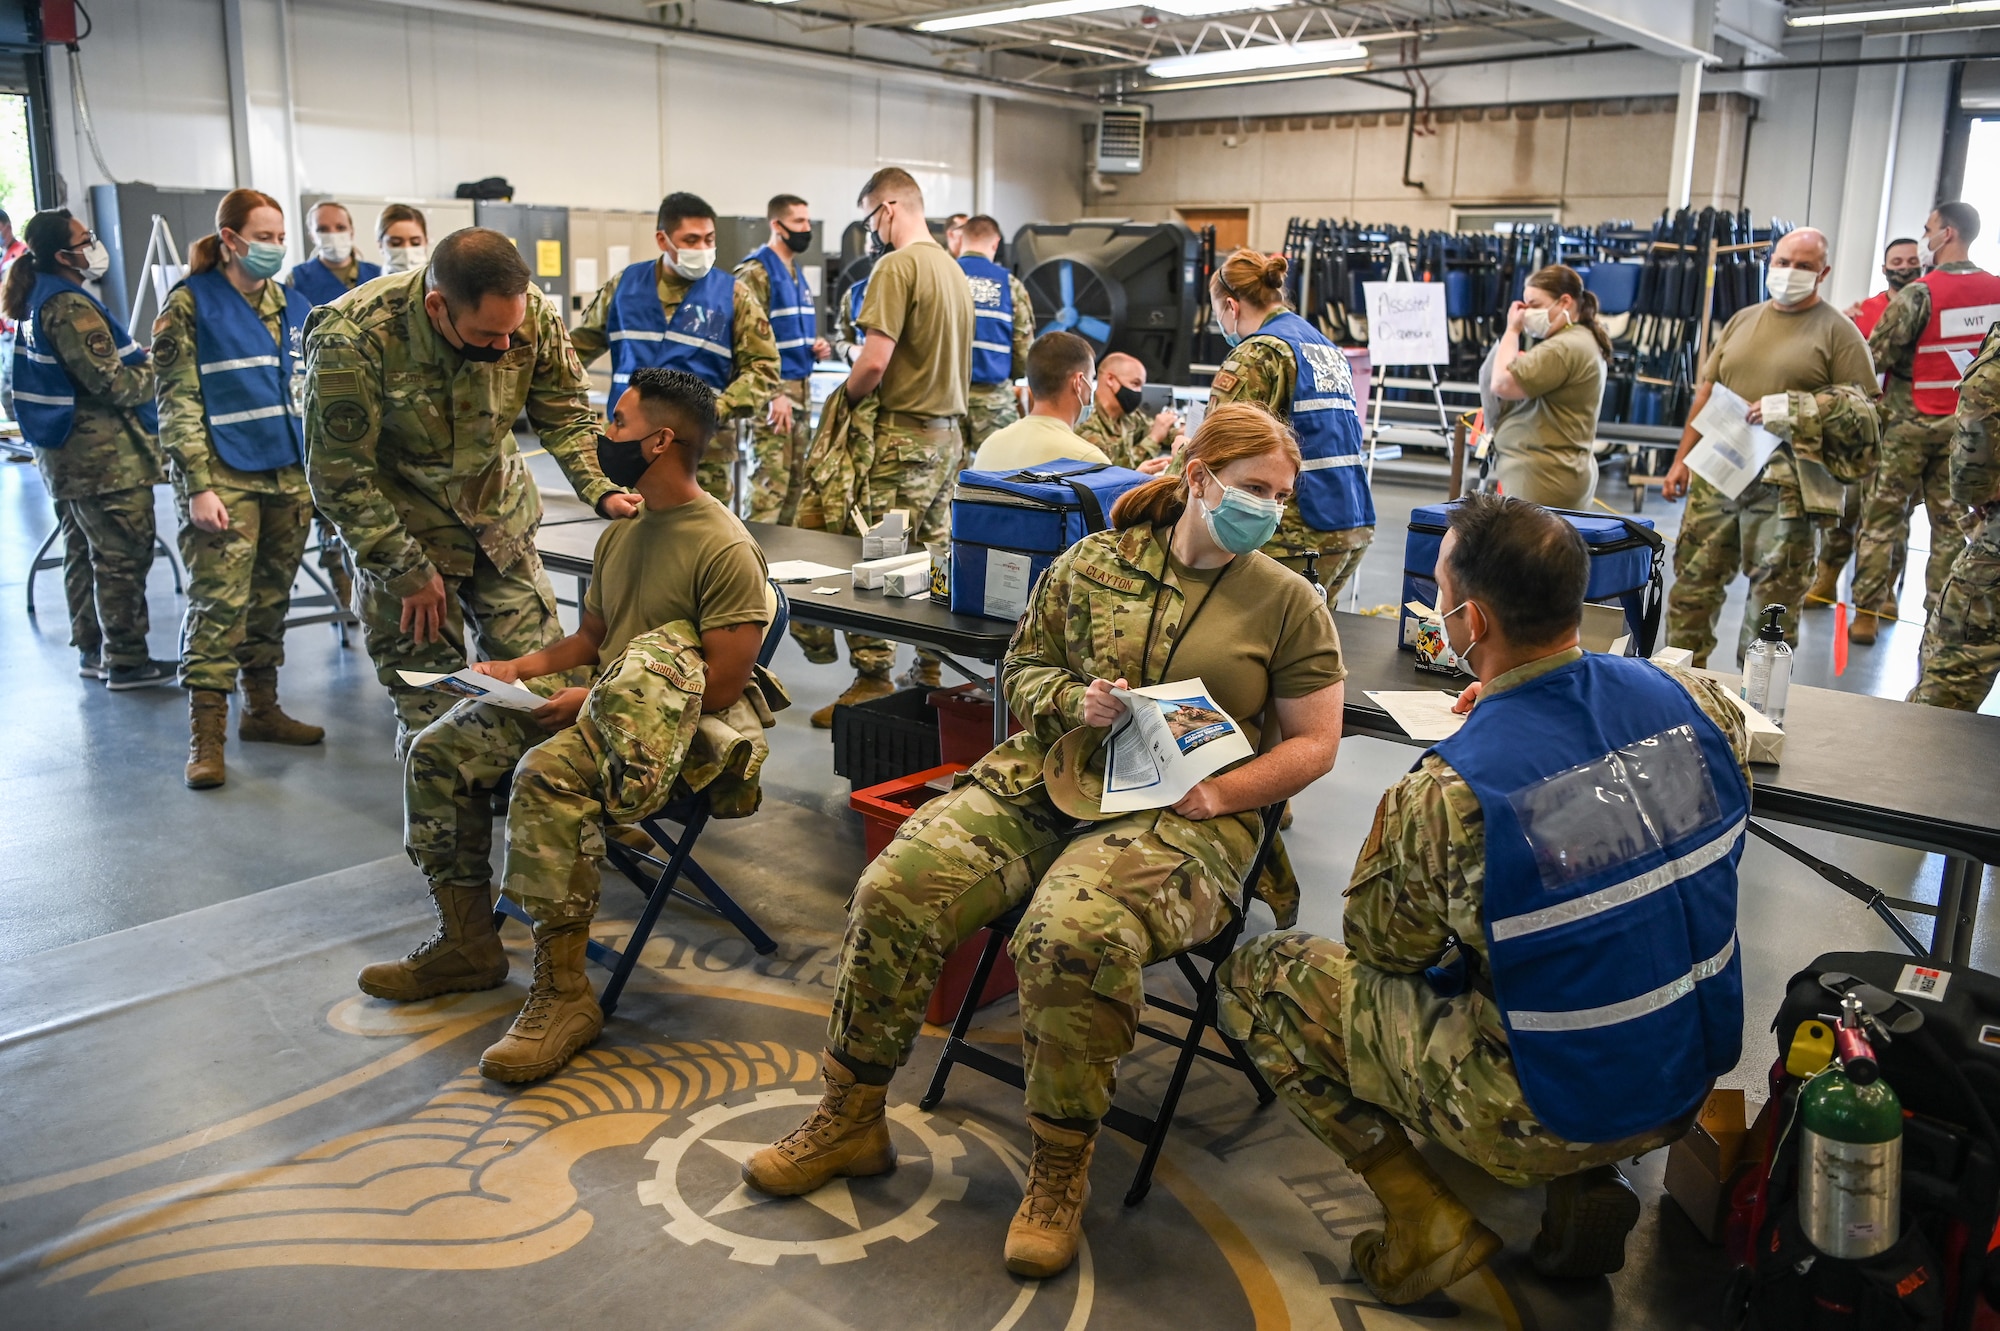 Members from 75th Medical Group simulate dispensing the anthrax vaccination Aug. 12, 2021, at Hill Air Force Base, Utah. The 75th MDG played out a mass-vaccination and medication dispersal scenario responding to an anthrax threat as part of Ready Eagle, an Air Force Medical Readiness Agency directed medical readiness training and exercise program. (U.S. Air Force photo by Cynthia Griggs)